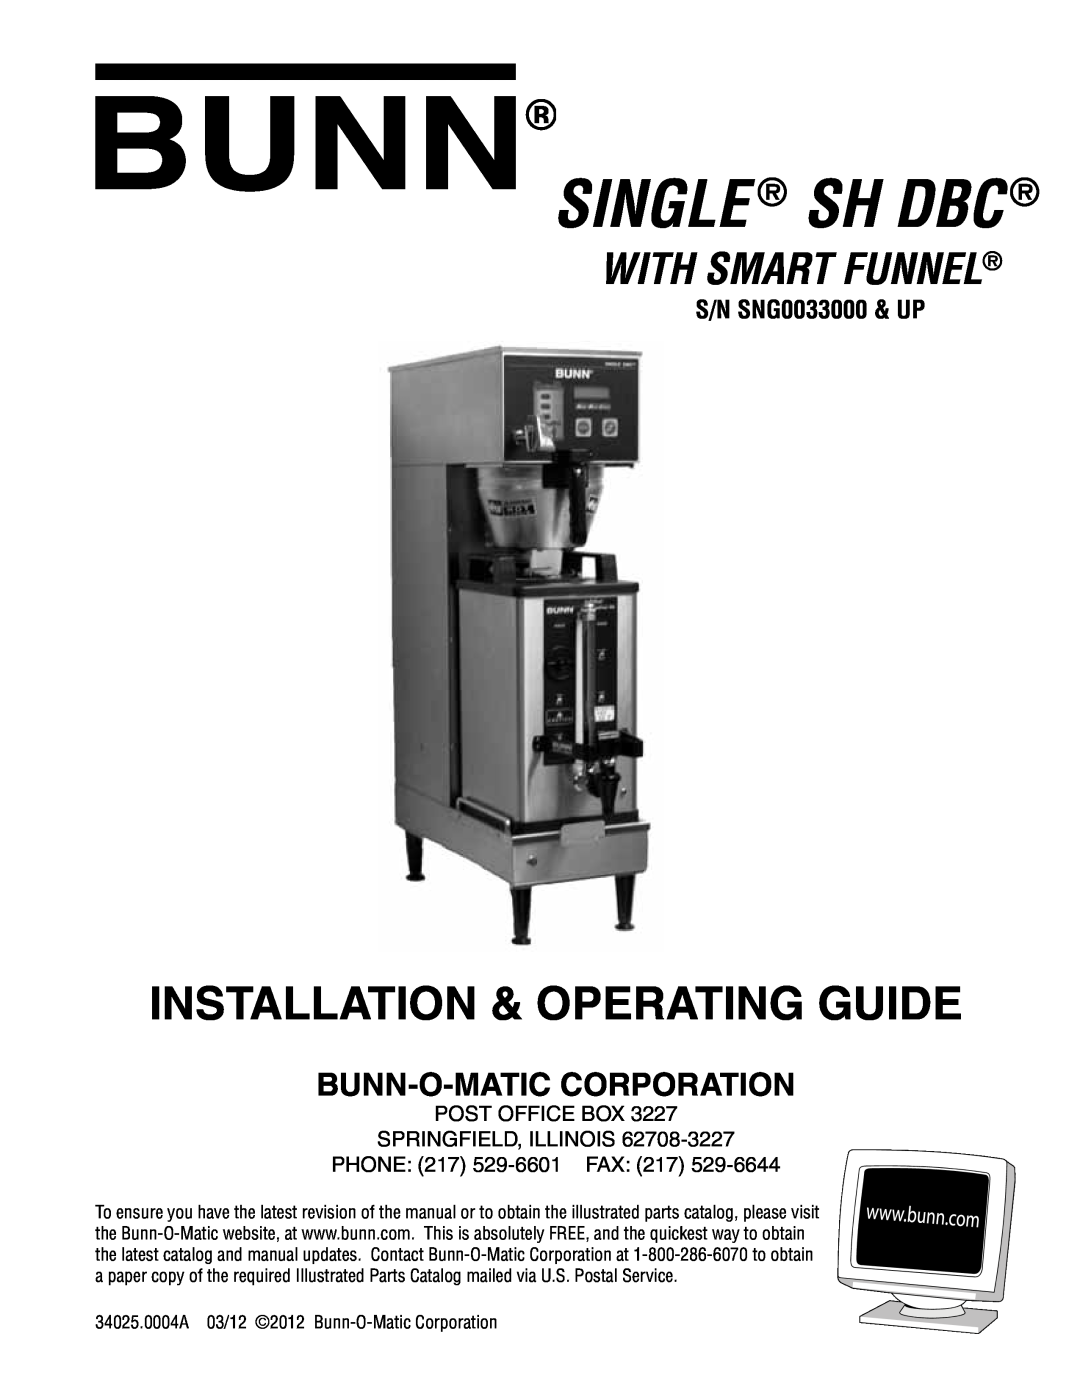 Bunn 34025.0004A manual S/N SNG0033000 & UP, Single Sh Dbc, Installation & Operating Guide, With Smart Funnel 